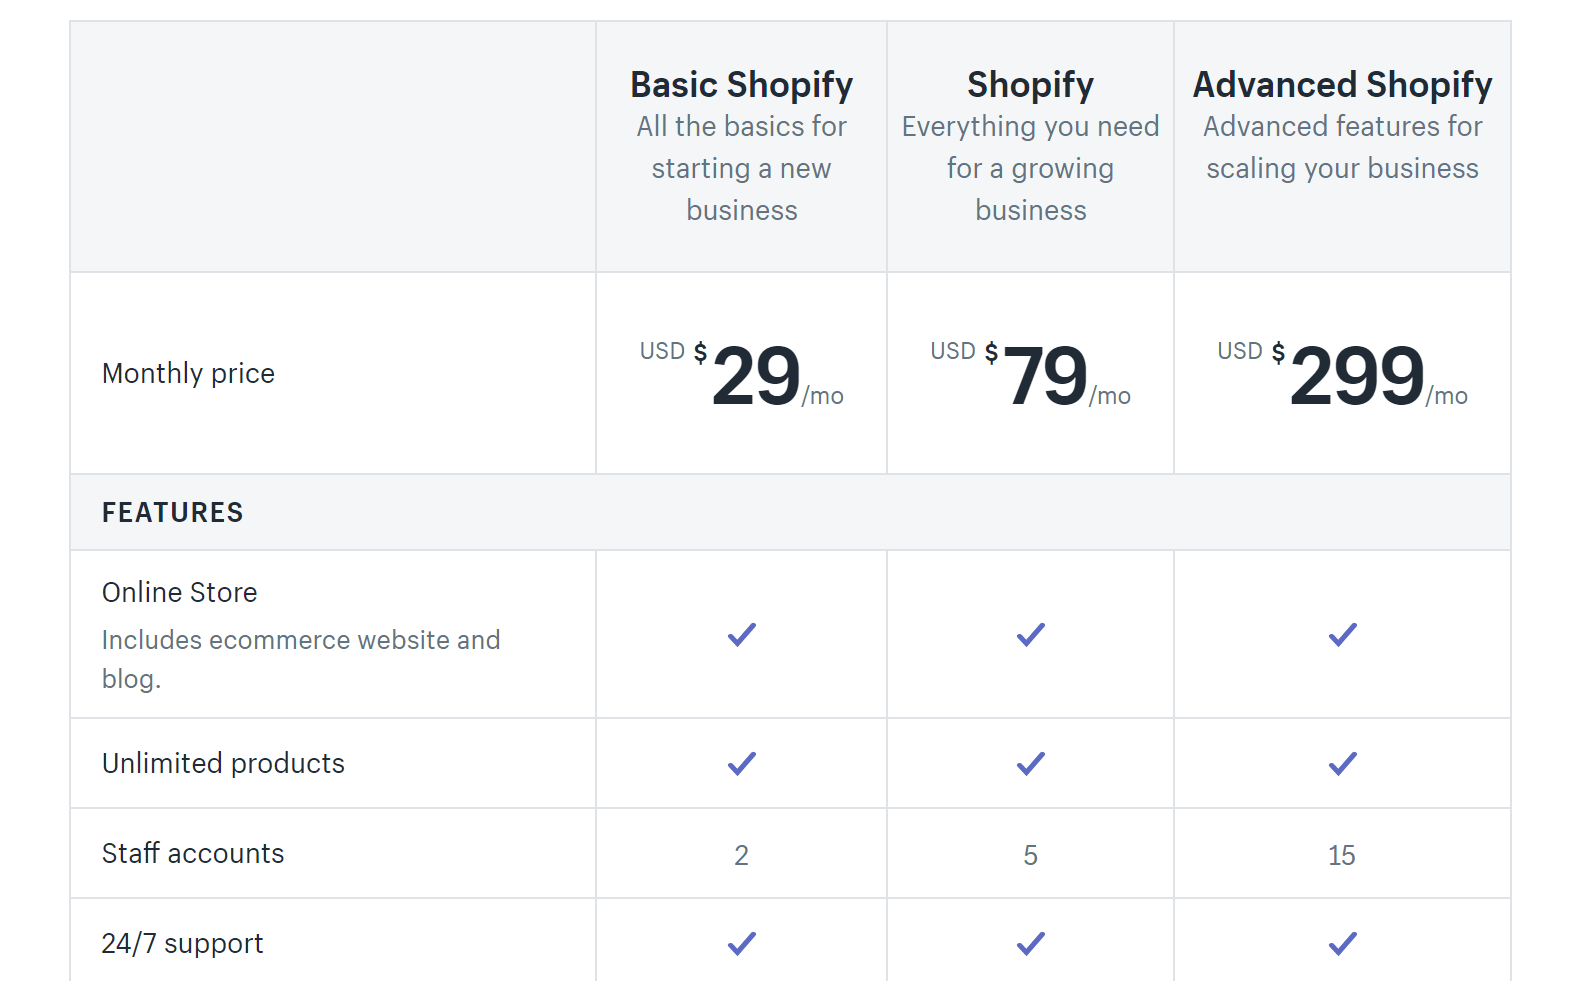 how much does an eCommerce website cost on Shopify